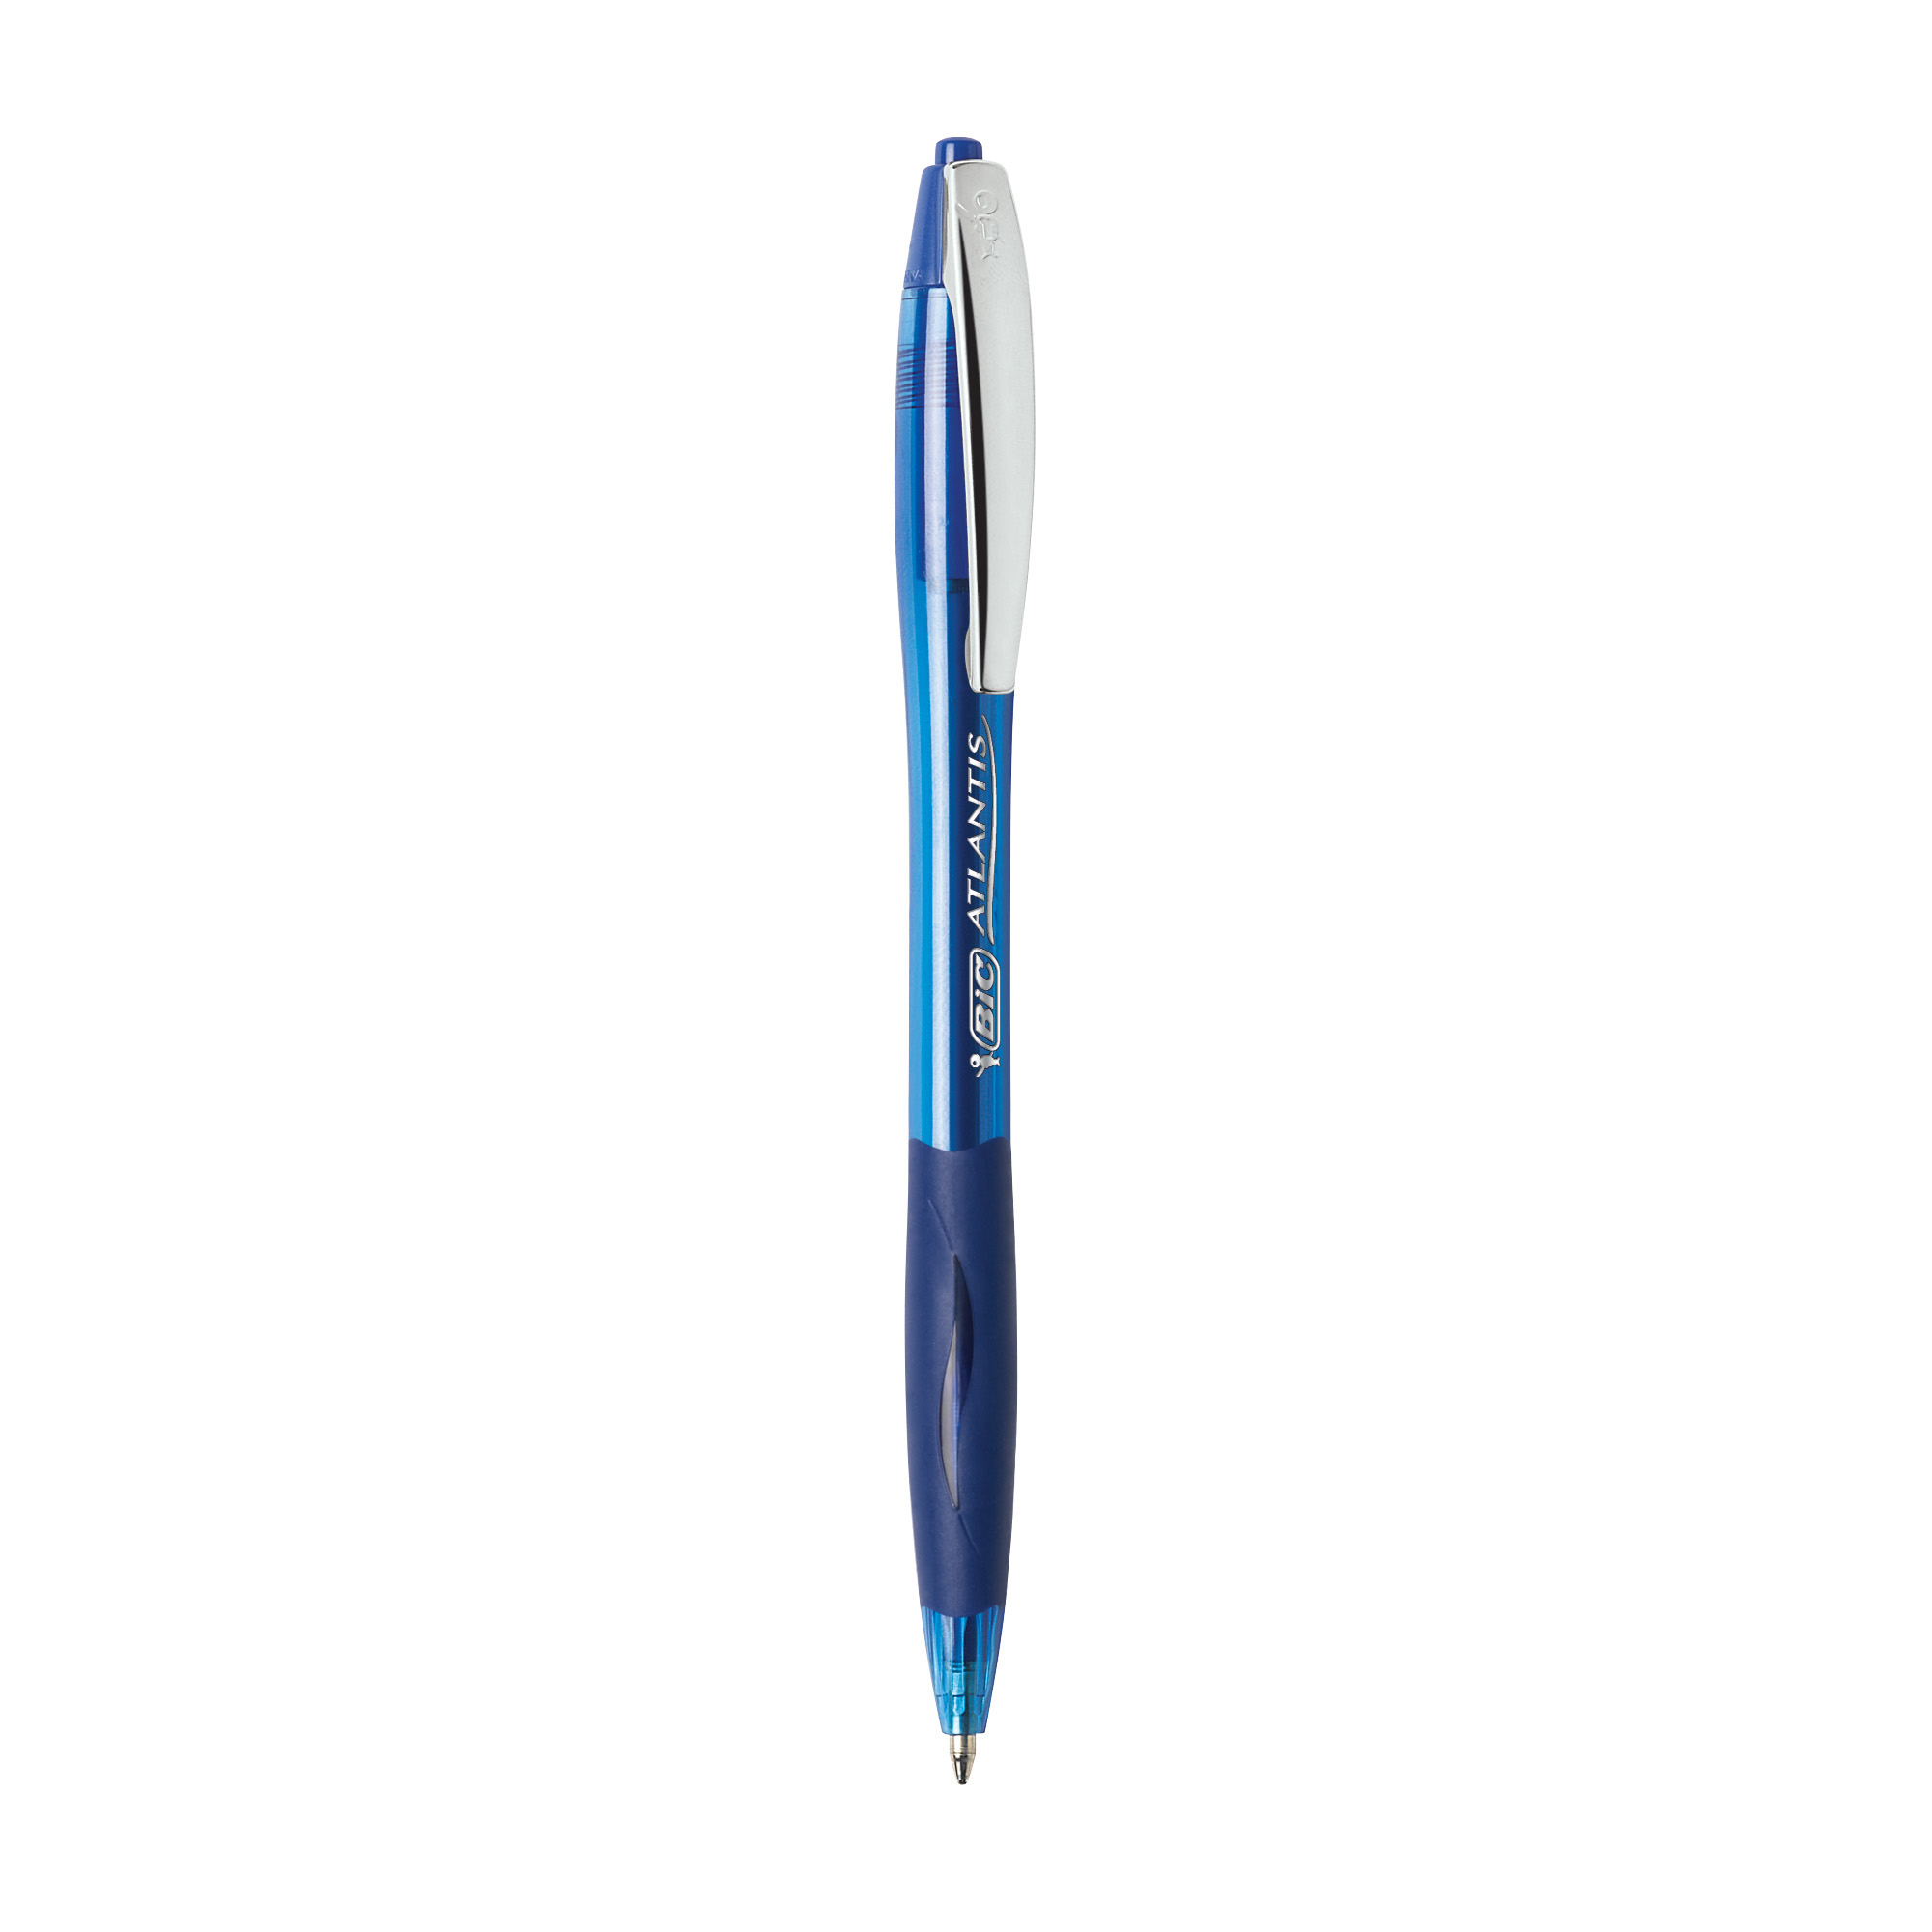 Schneider Reco Retractable Ballpoint Pen (Recycled Plastic), White, Bl